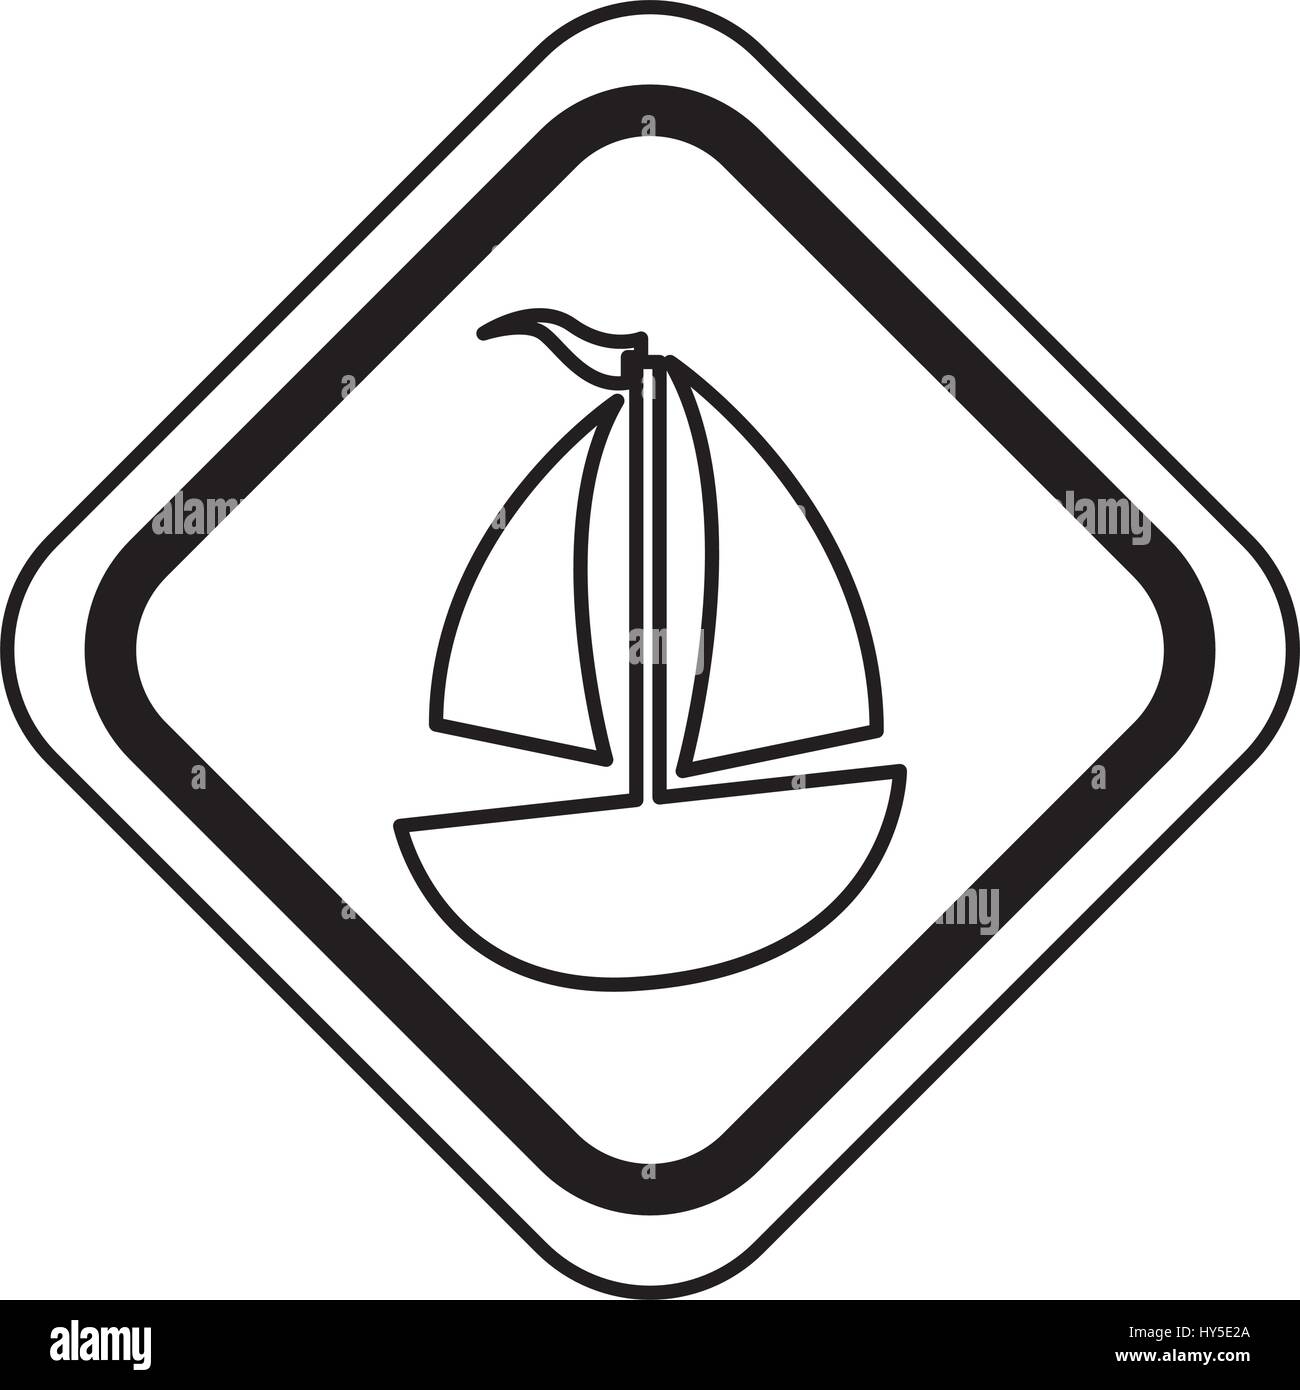 traffic signal with sailboat ship isolated icon vector illustration design Stock Vector